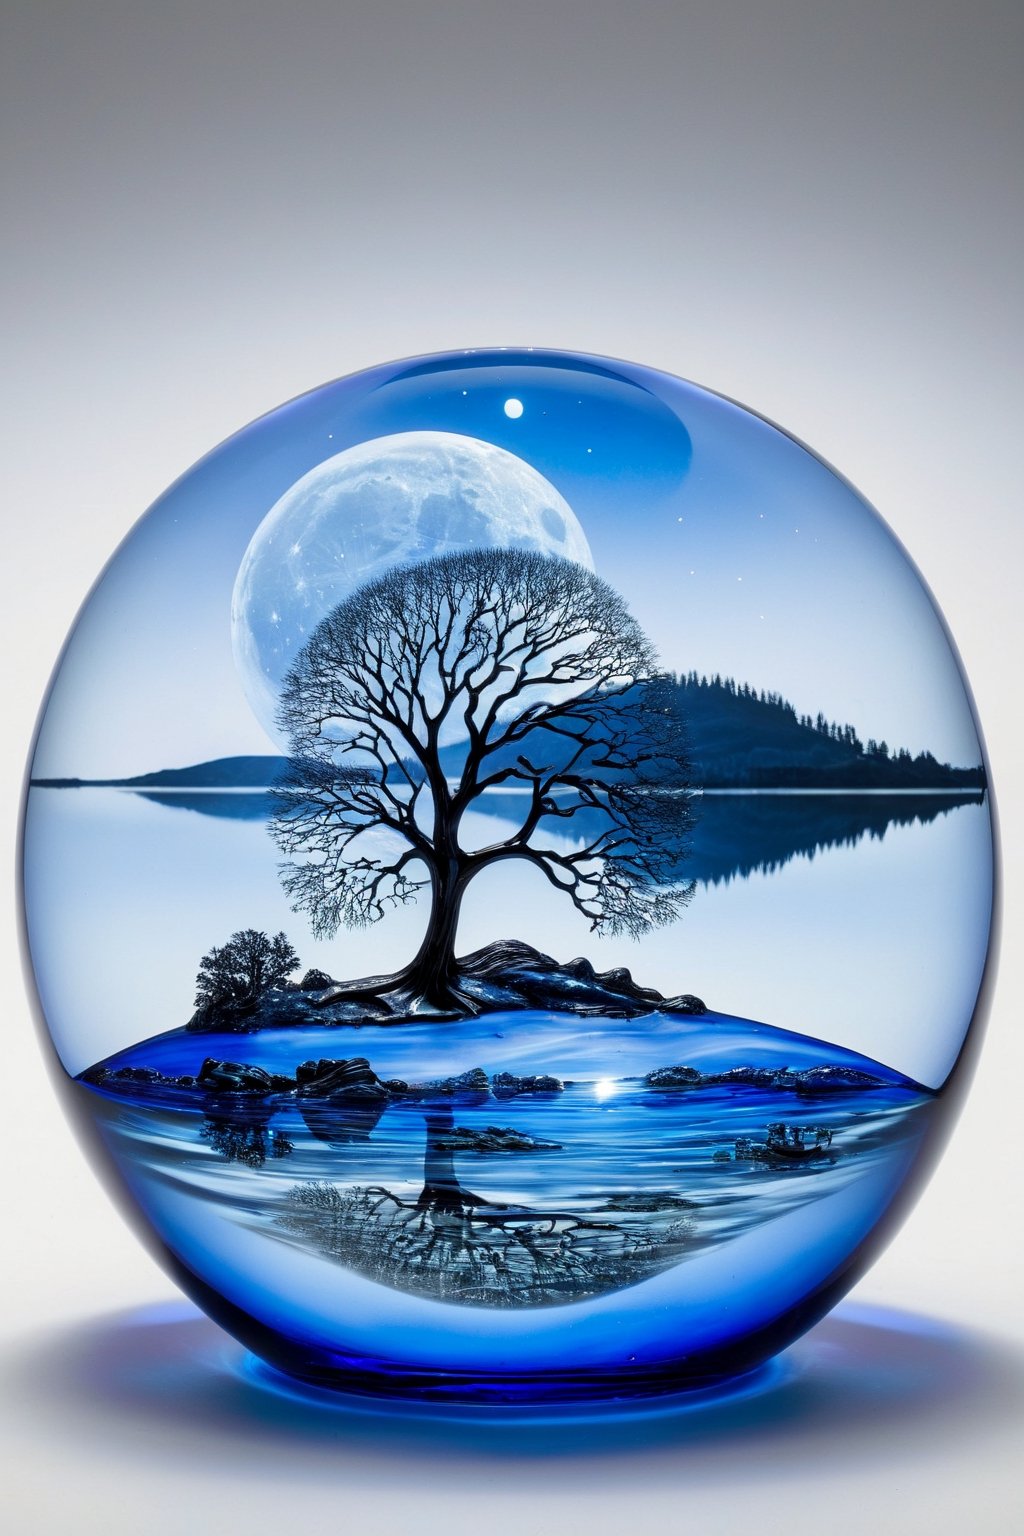 An extremely beautiful blown glass creation with an image insie of a blue moon over a beautiful lake